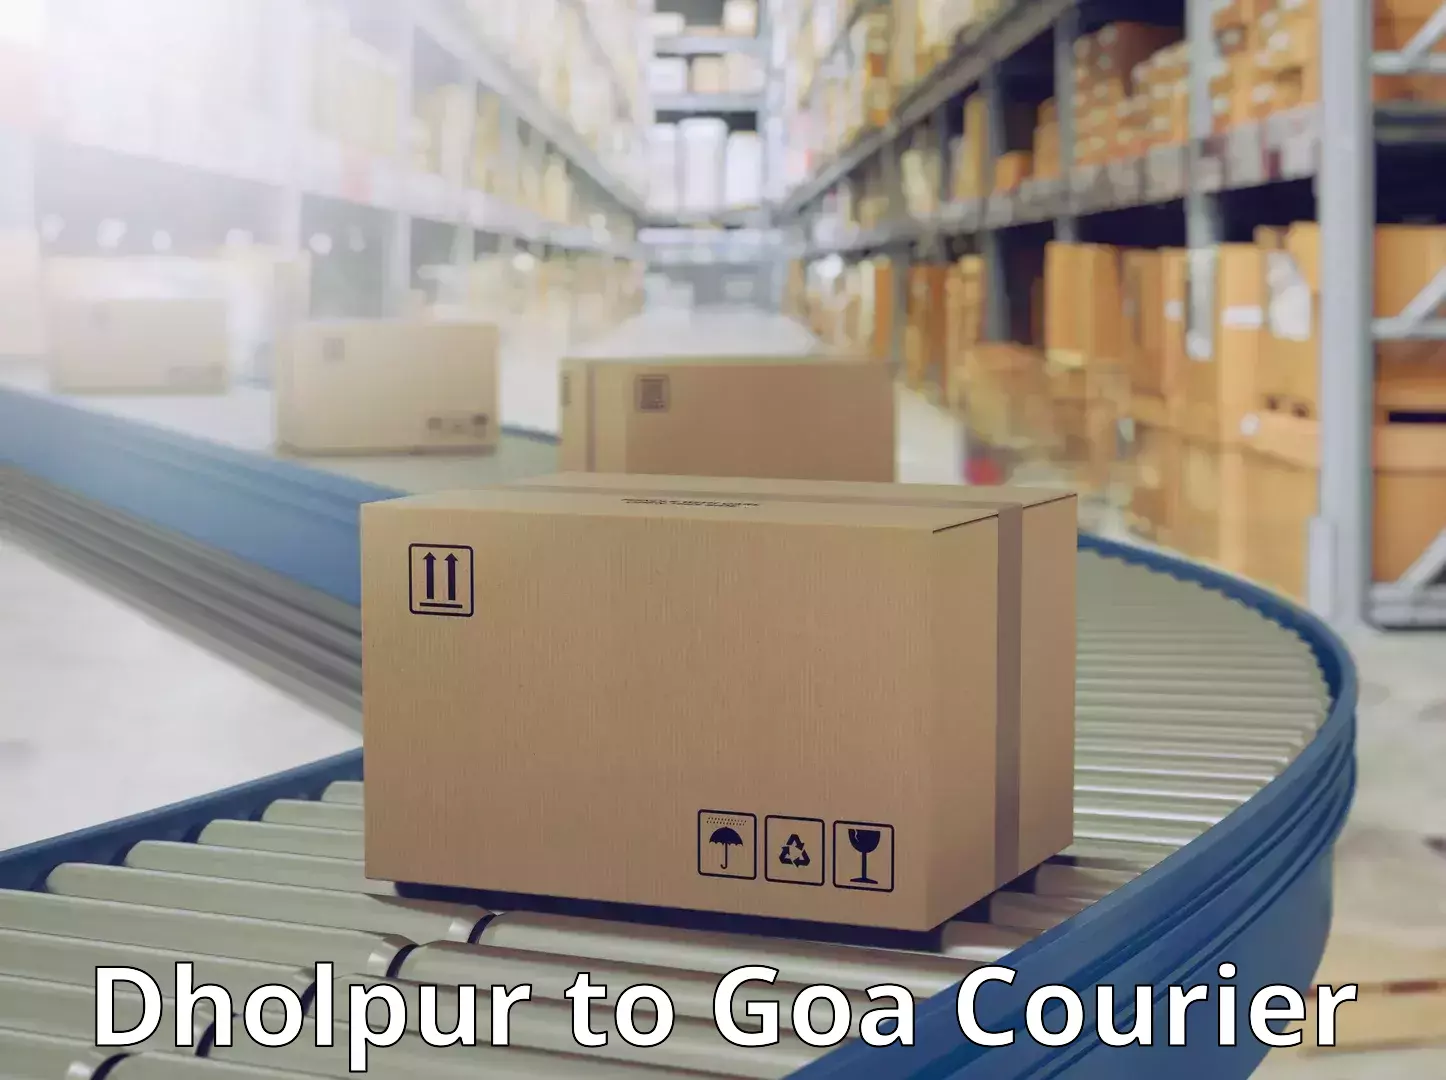 Express delivery capabilities Dholpur to IIT Goa